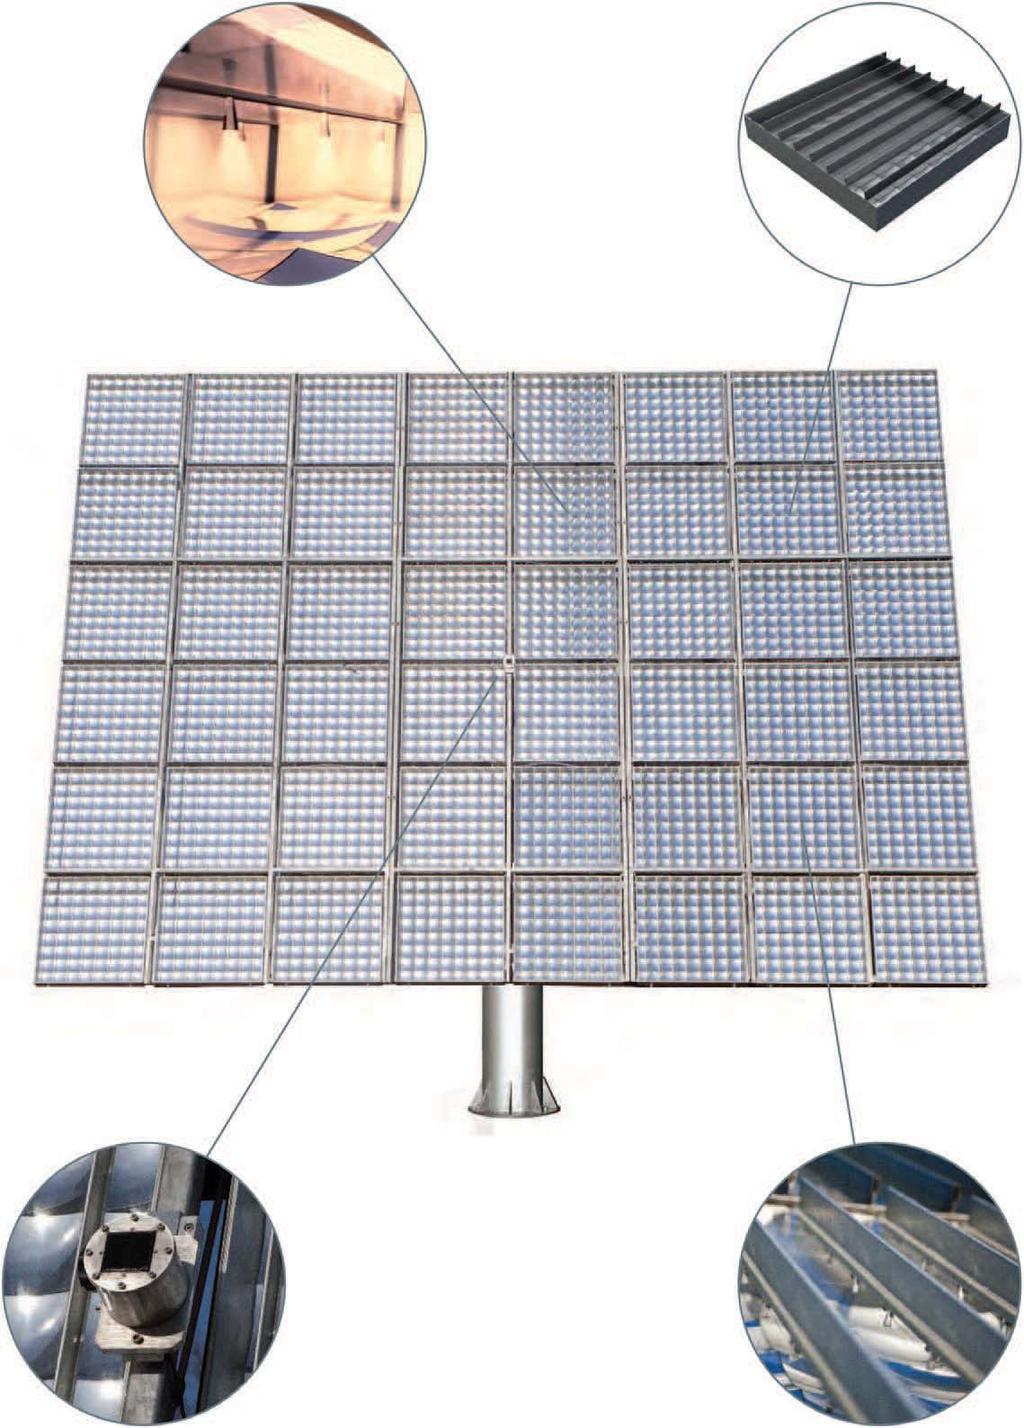 Concentrating area Single high concentration photovoltaic module